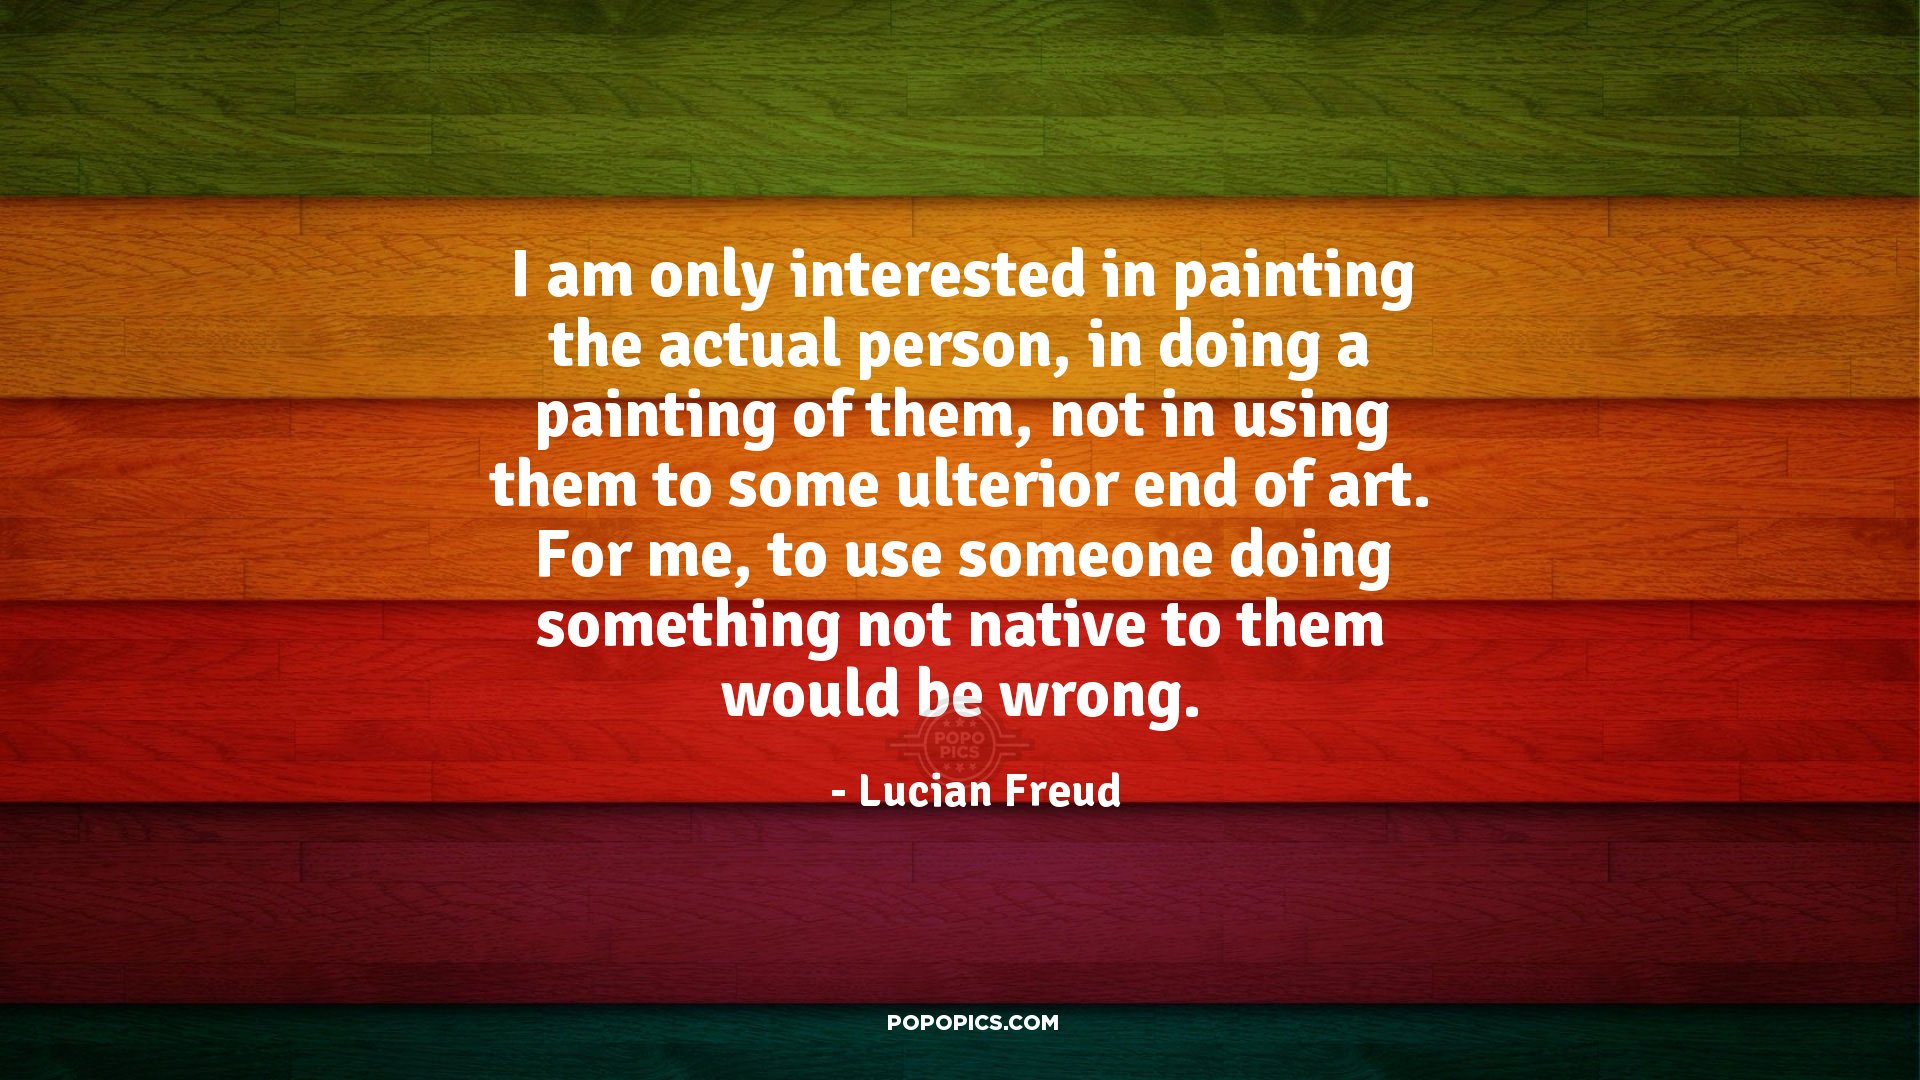 I Am Only Interested In Painting The Actual Person, - HD Wallpaper 